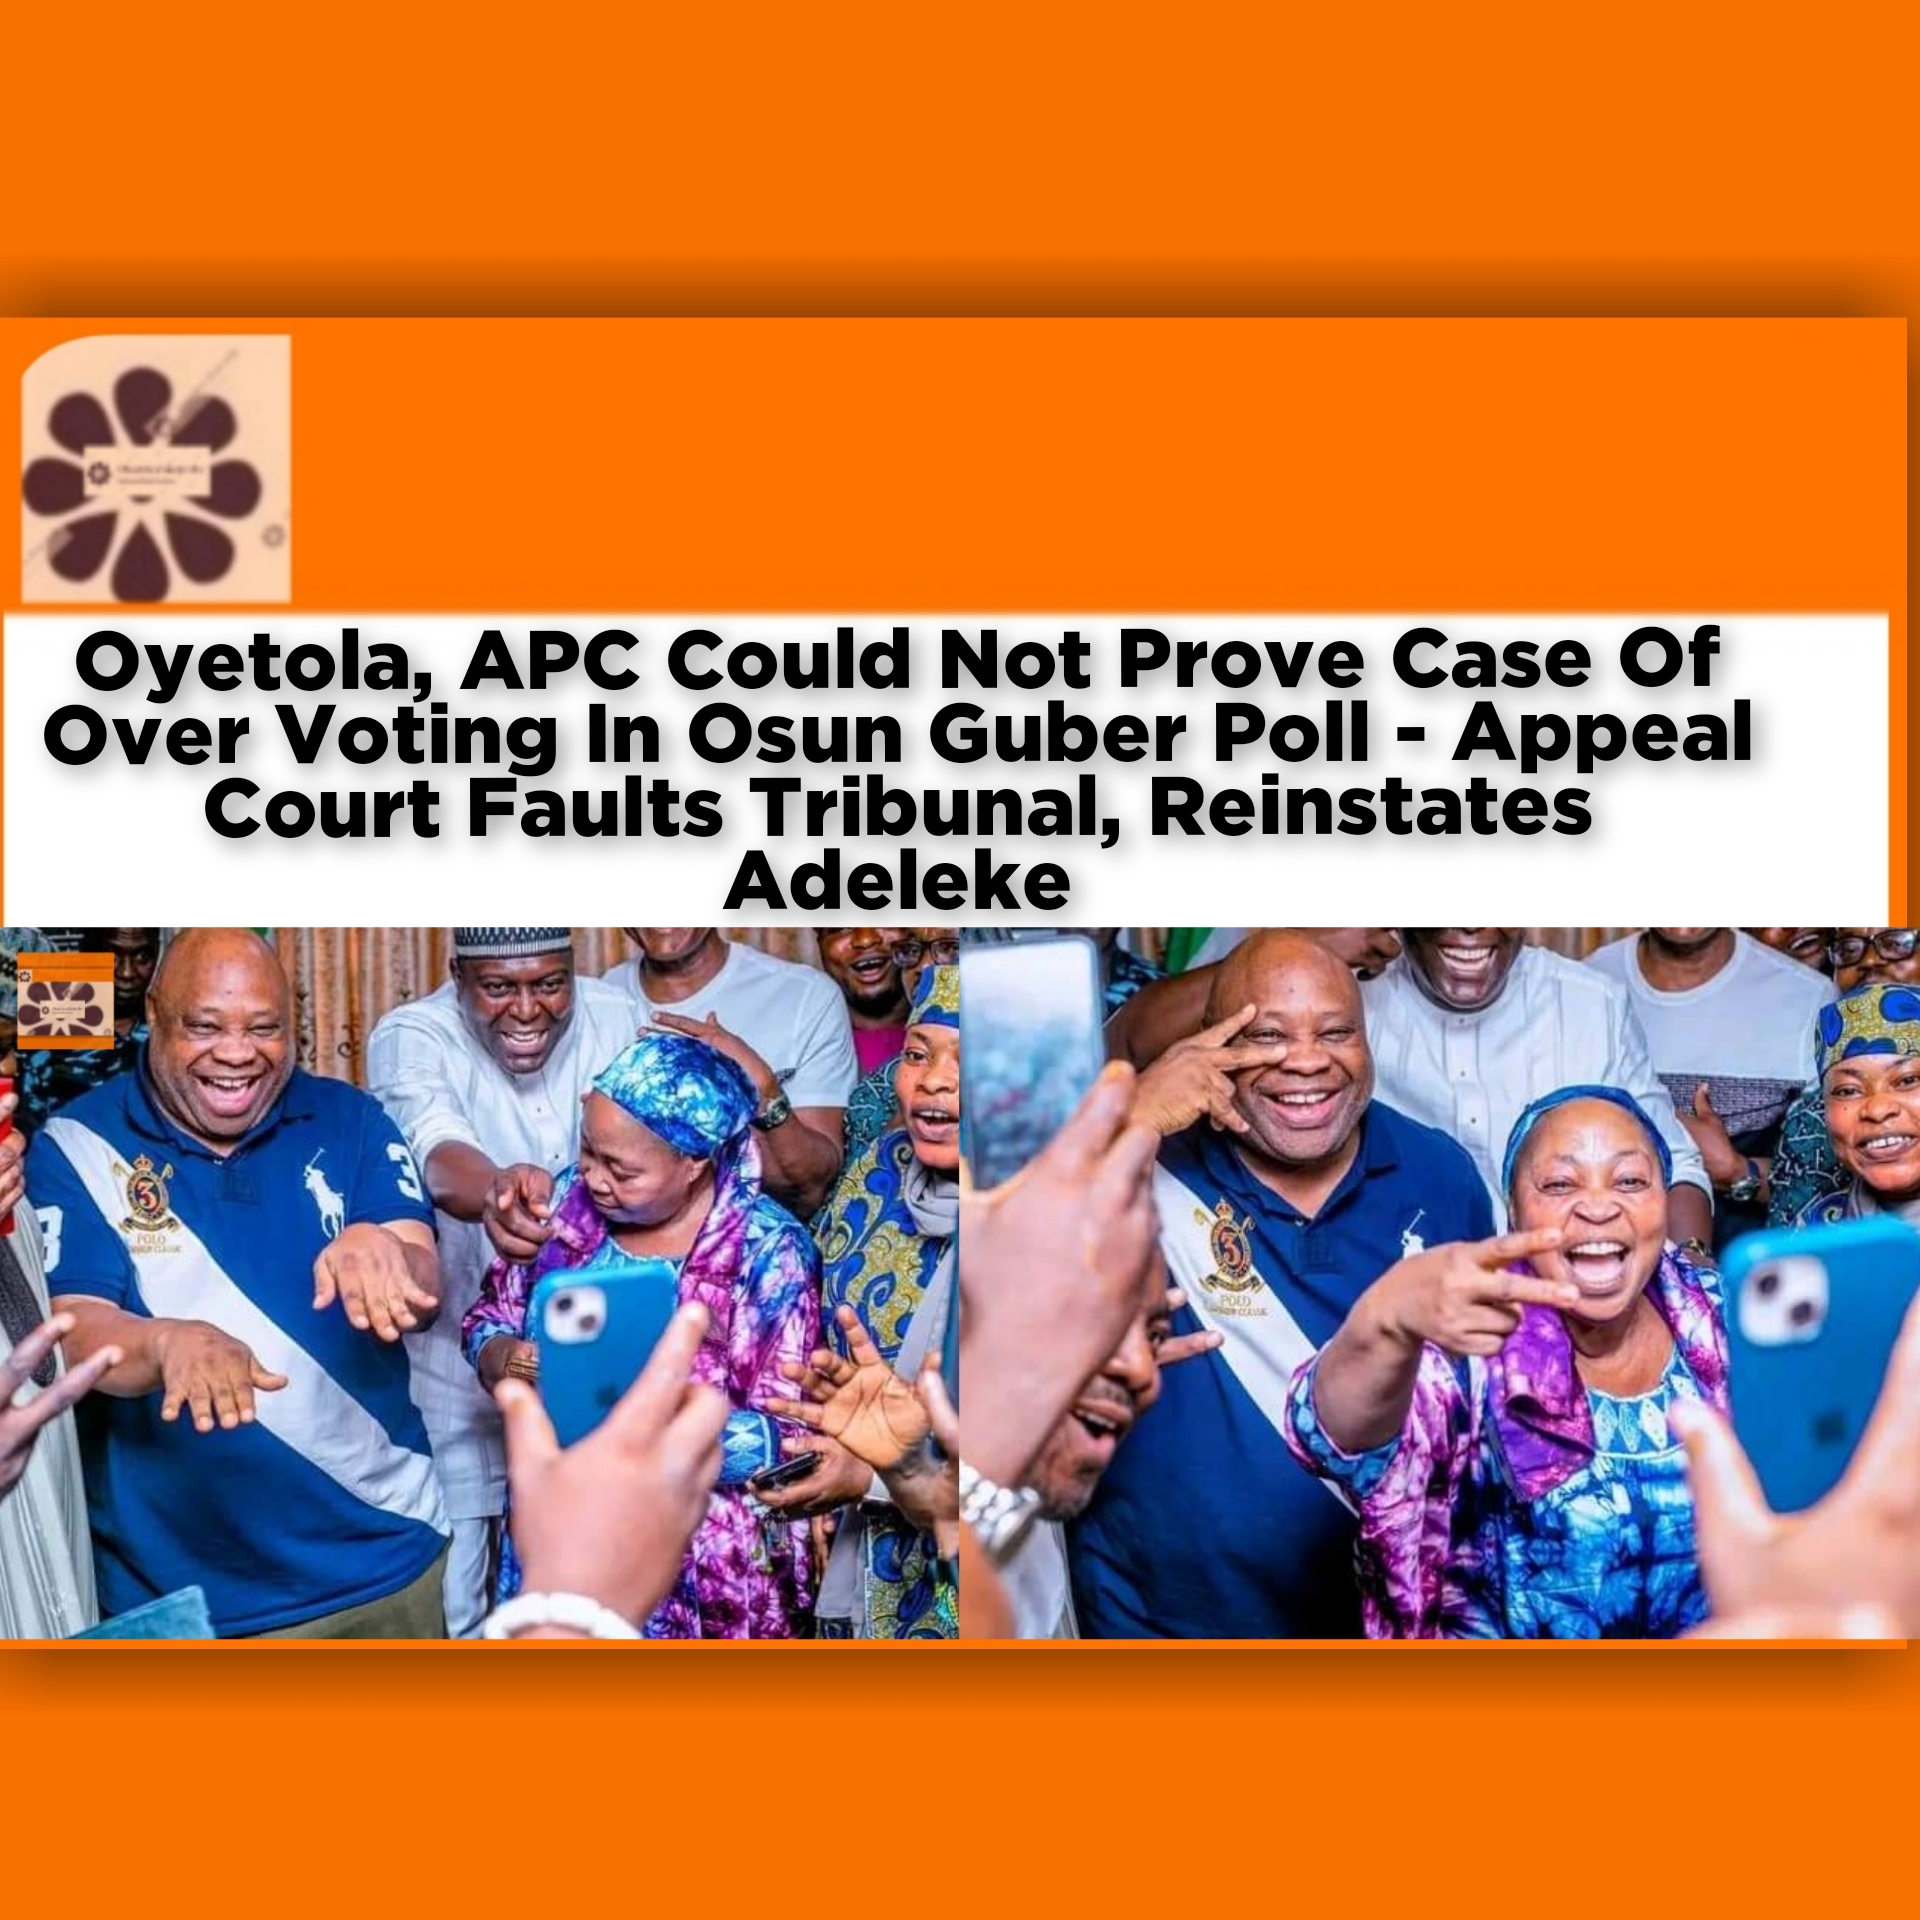 Oyetola, APC Could Not Prove Case Of Over Voting In Osun Guber Poll - Appeal Court Faults Tribunal, Reinstates Adeleke ~ OsazuwaAkonedo #God